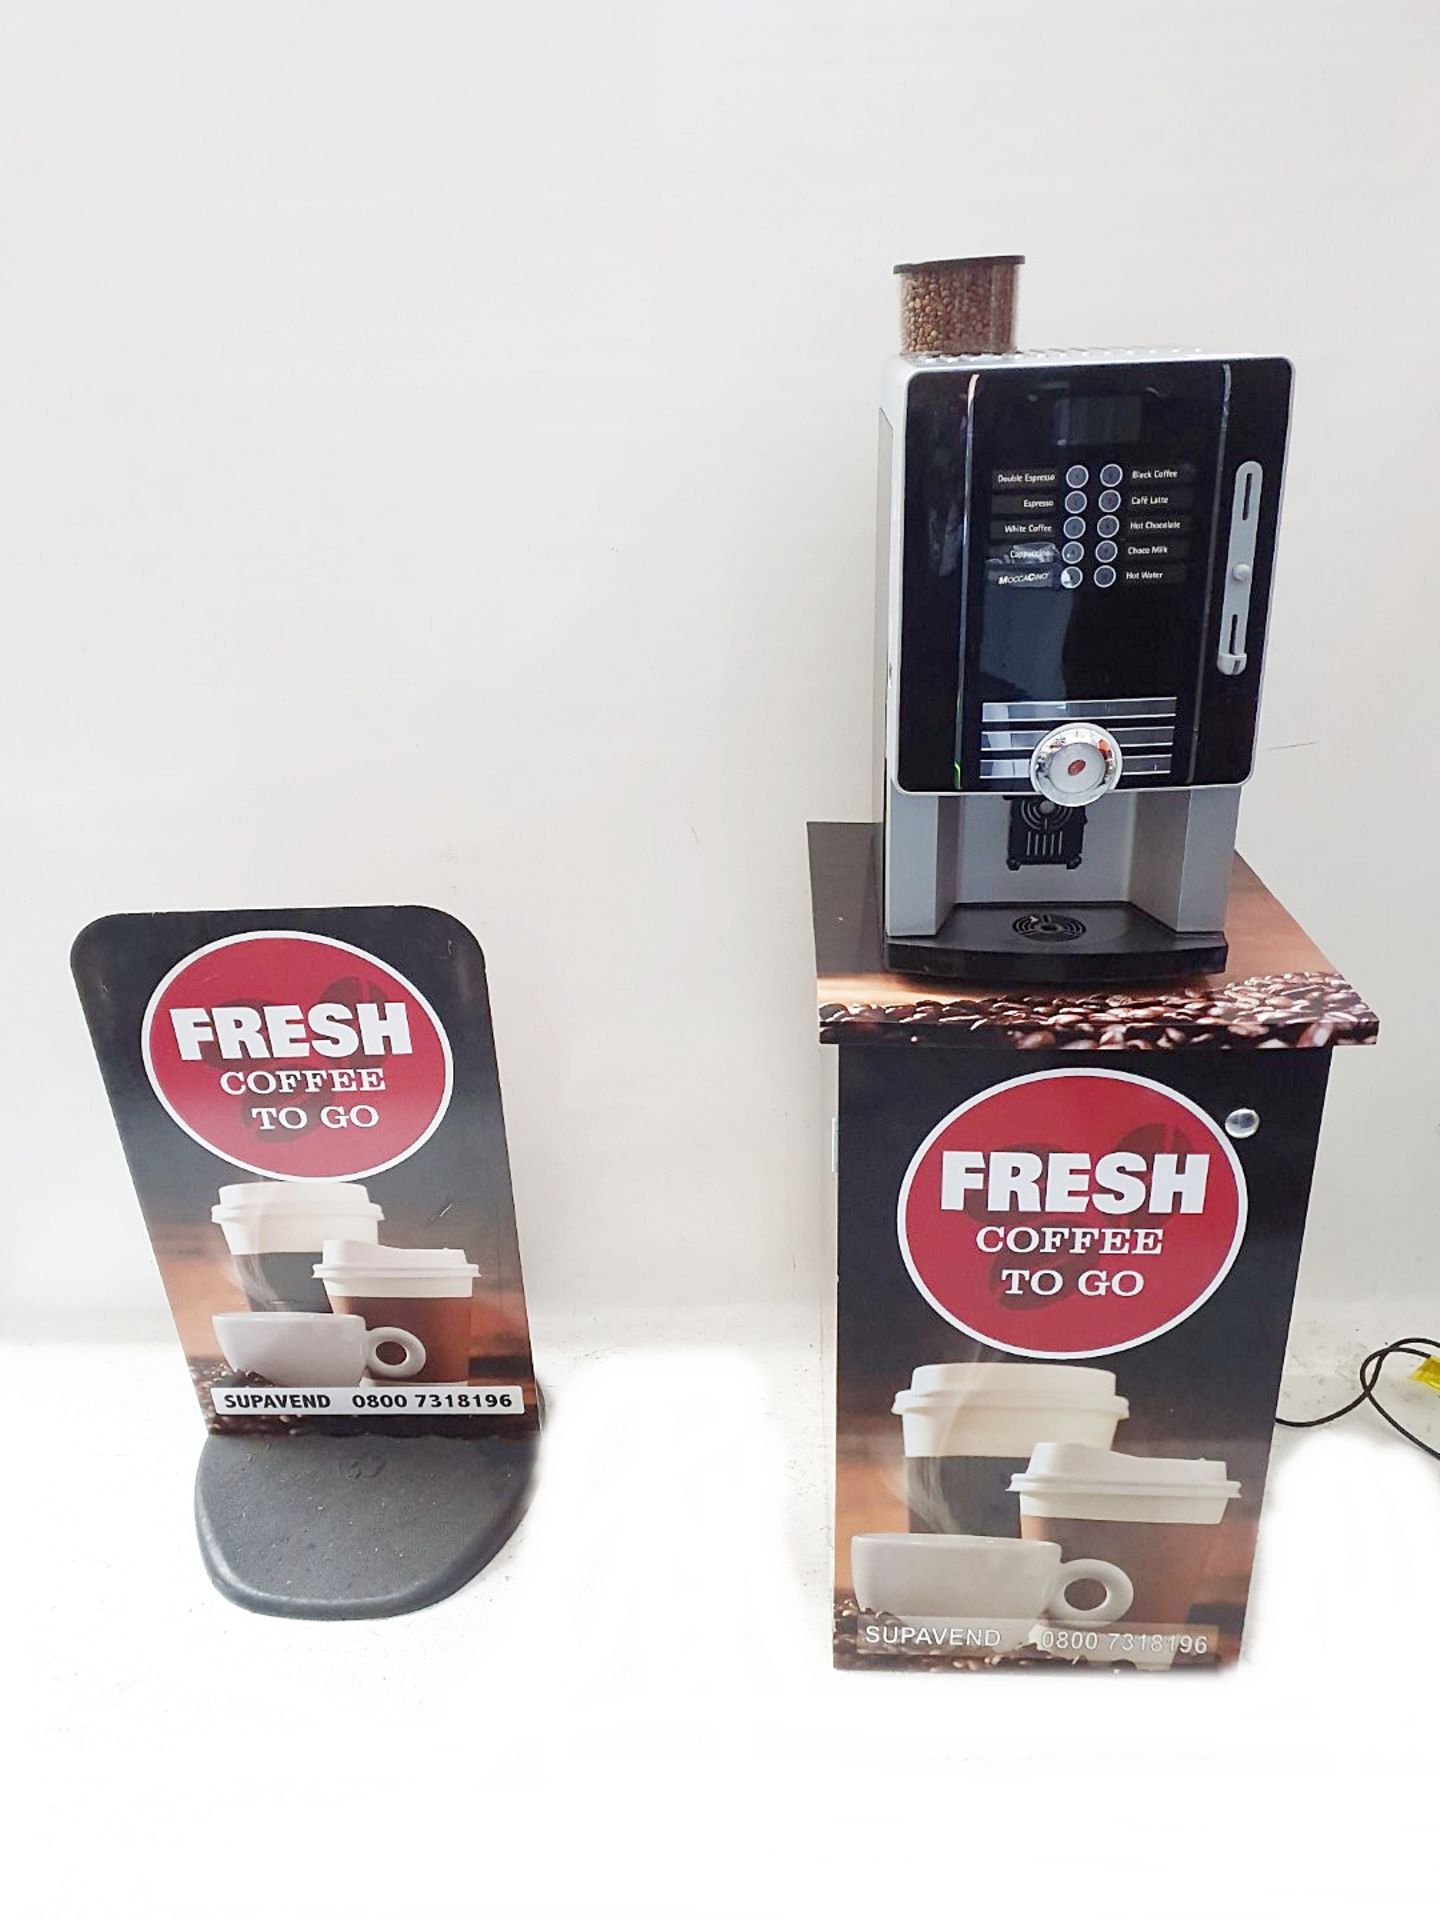 1 x Rheavendors eC Commercial Coffee Machine With Stand and Sign - Ref: LD439 - CL445 - WA14